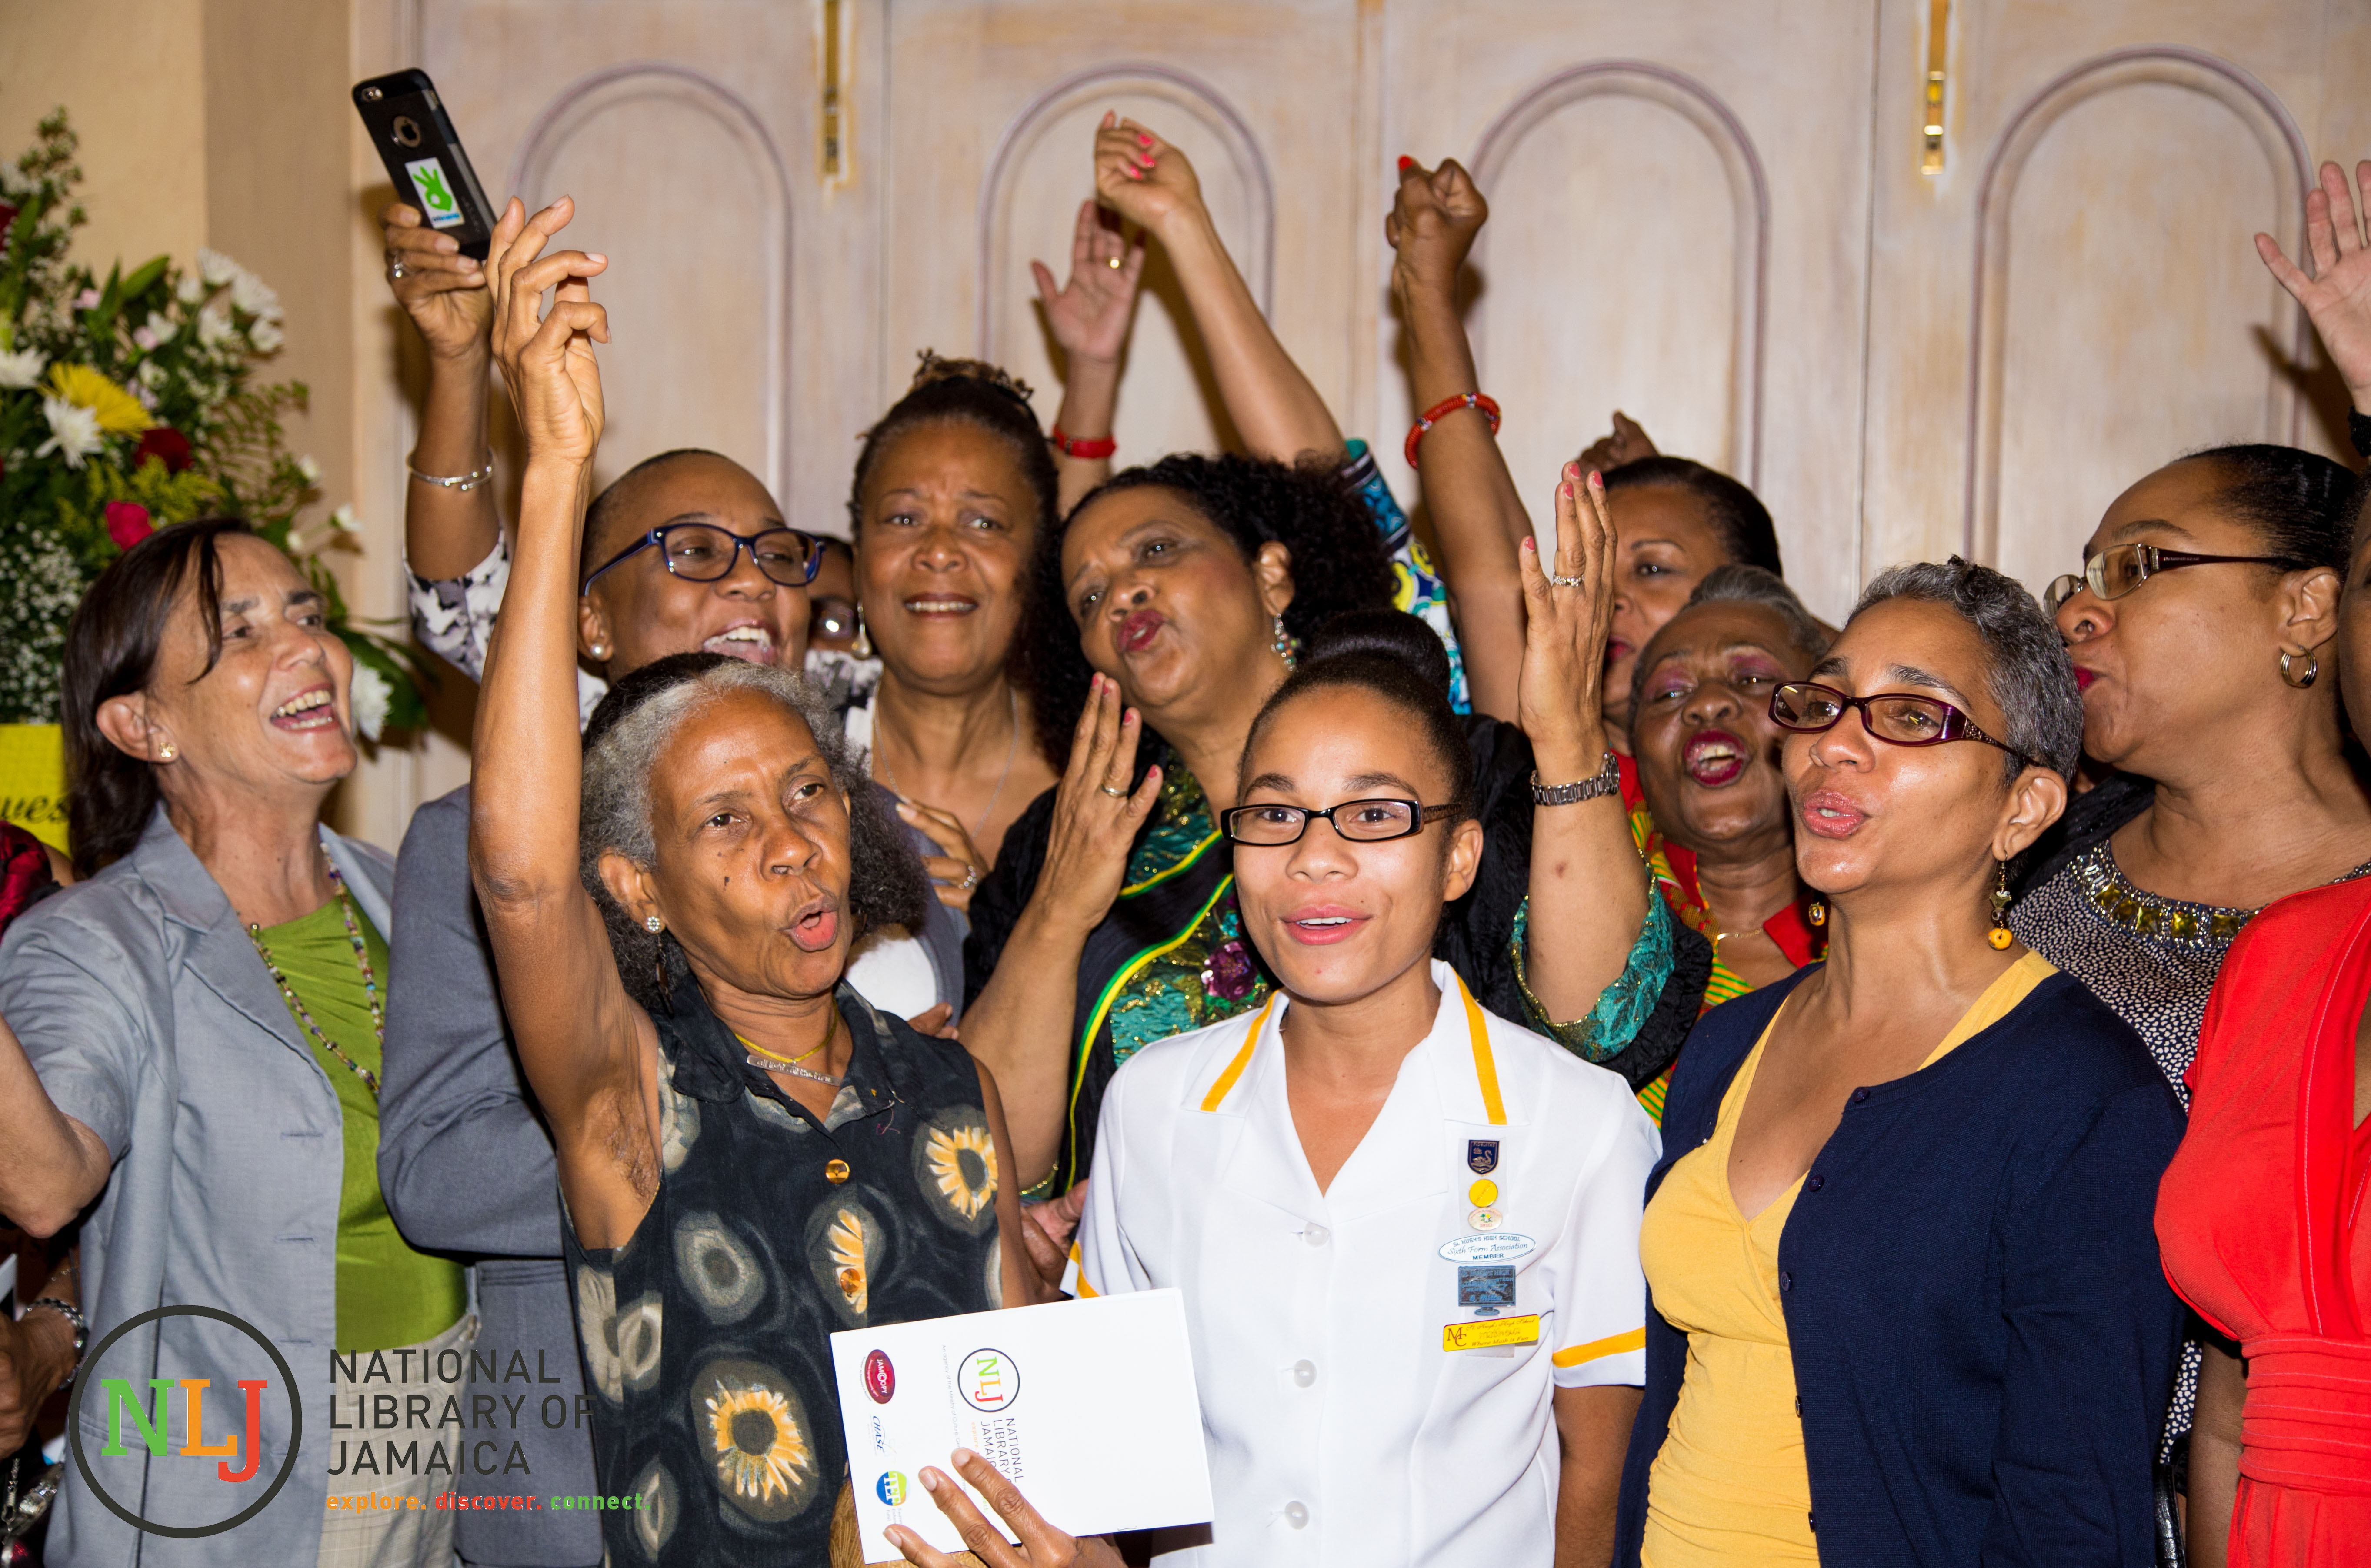 Past Students of St. Hugh's High School sing their school song at the Ceremony of Investiture of the Poet Laureate of Jamaica